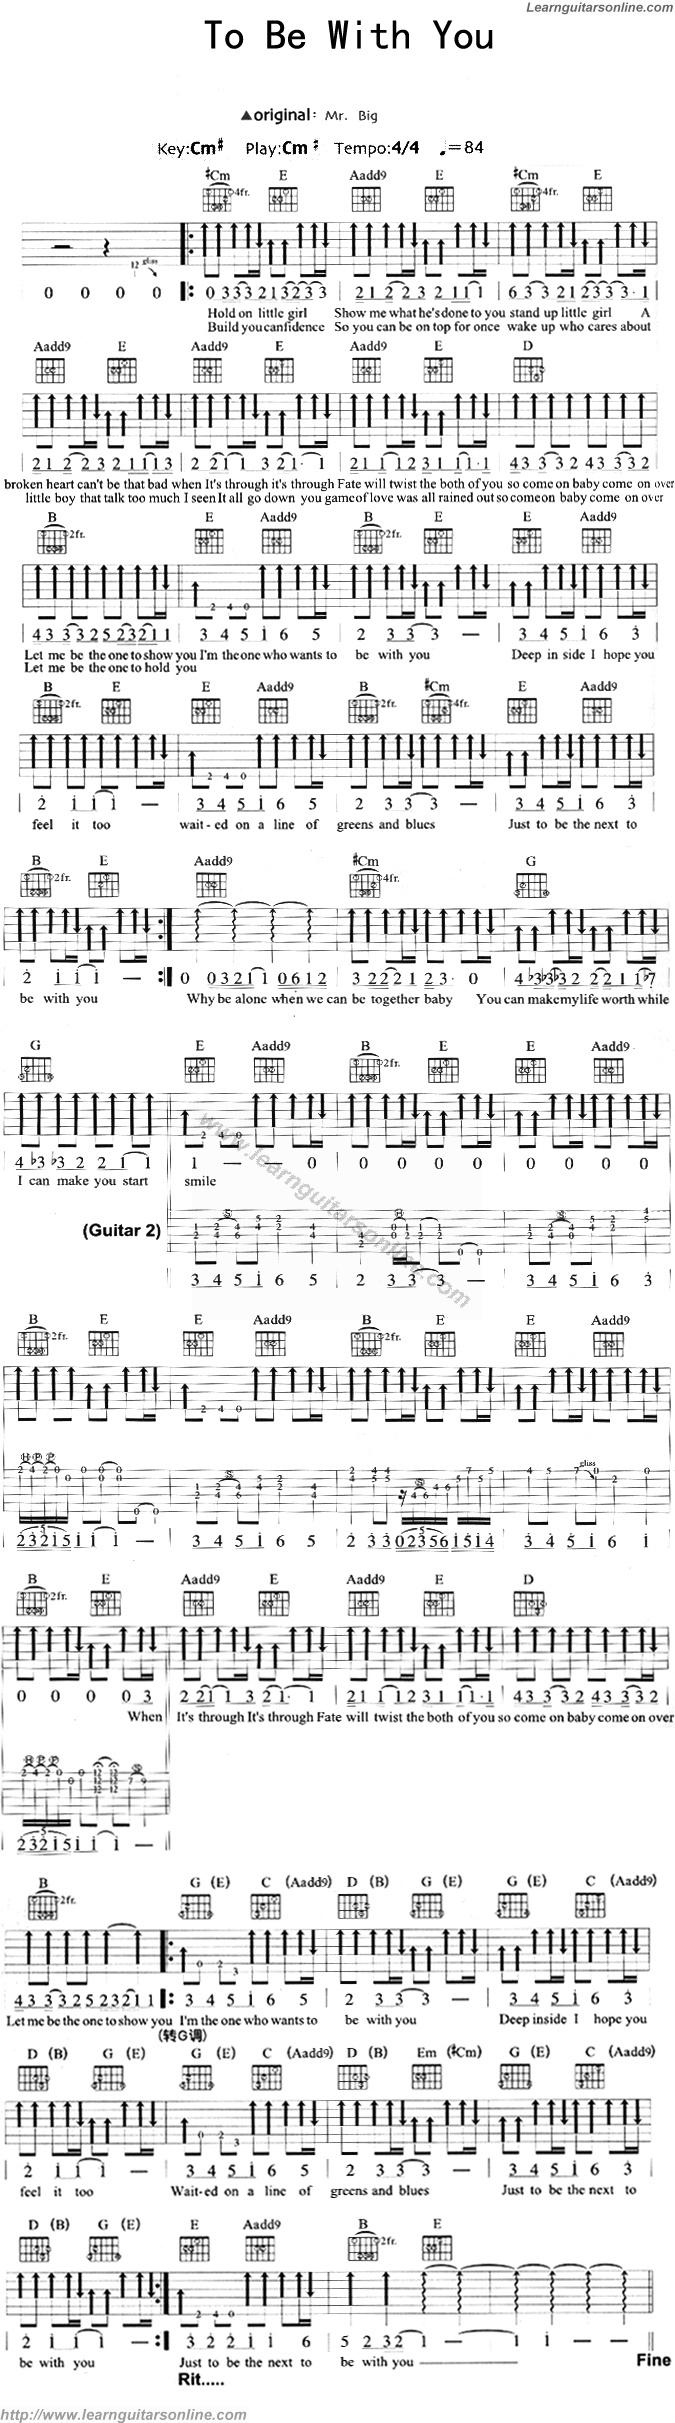 To Be With You by Mr Big Guitar Tabs Chords Solo Notes Sheet Music Free